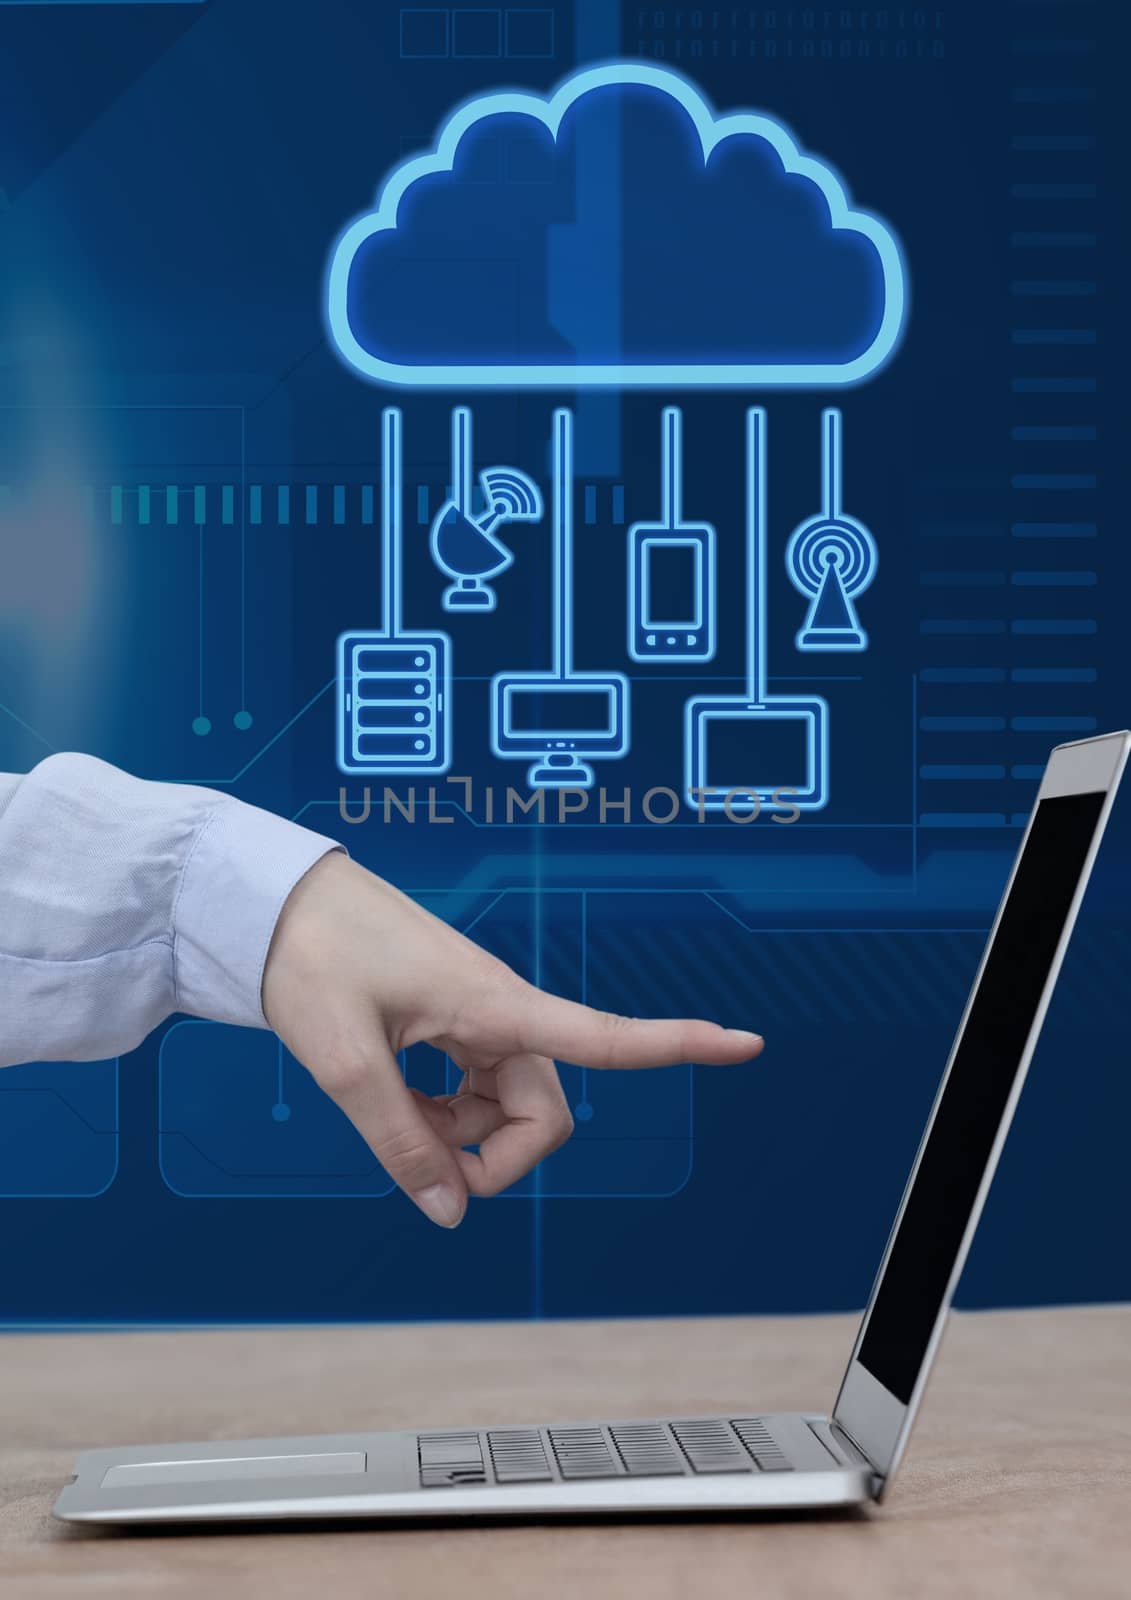 Digital composite of Hand pointing at laptop with cloud icon and hanging connection devices and technology background